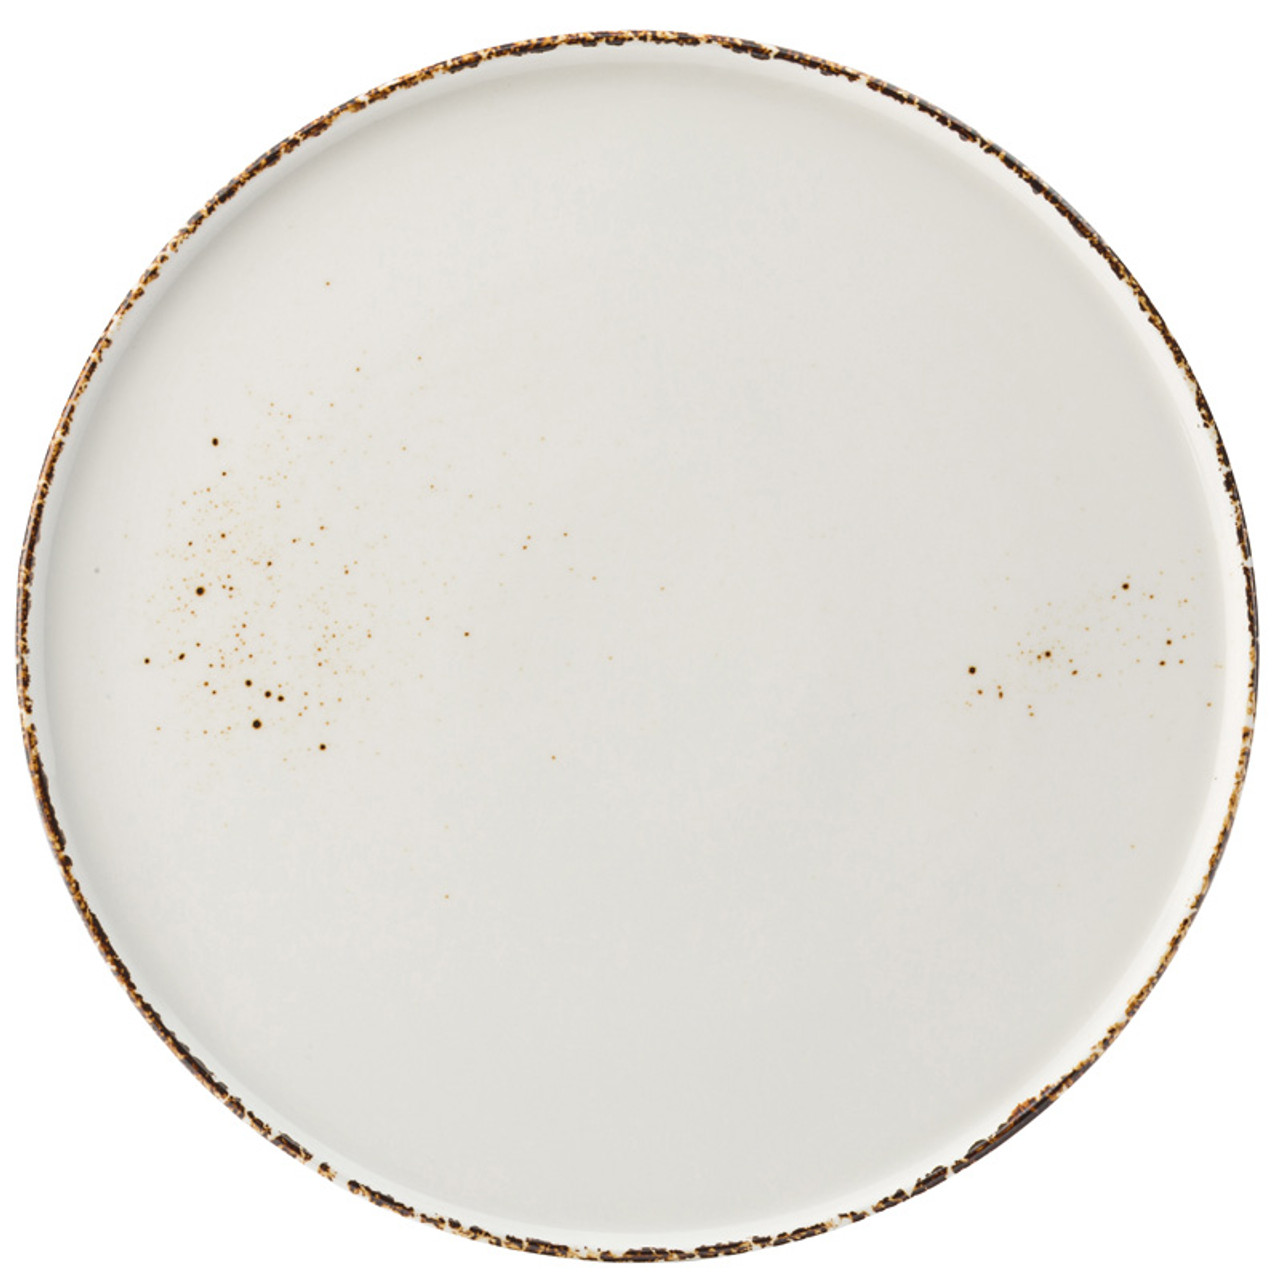 UMBRA COUPE PLATE 10.5" (27CM)